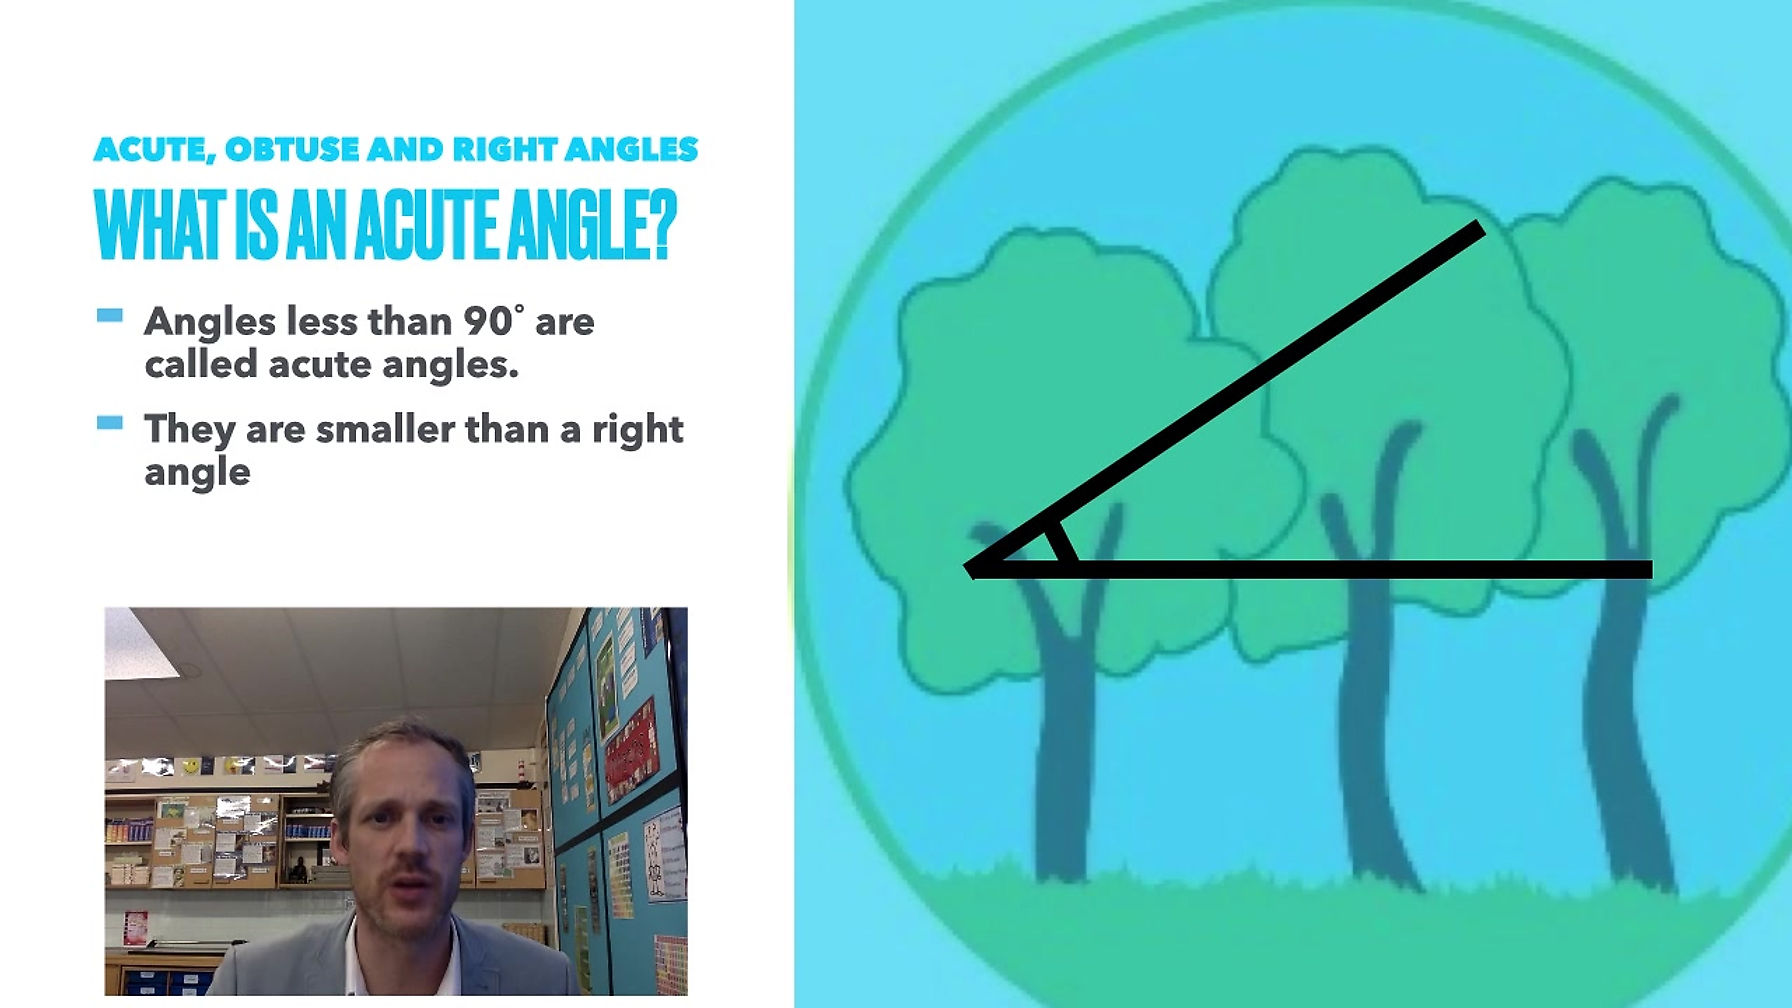 Acute, Obtuse and Right Angles